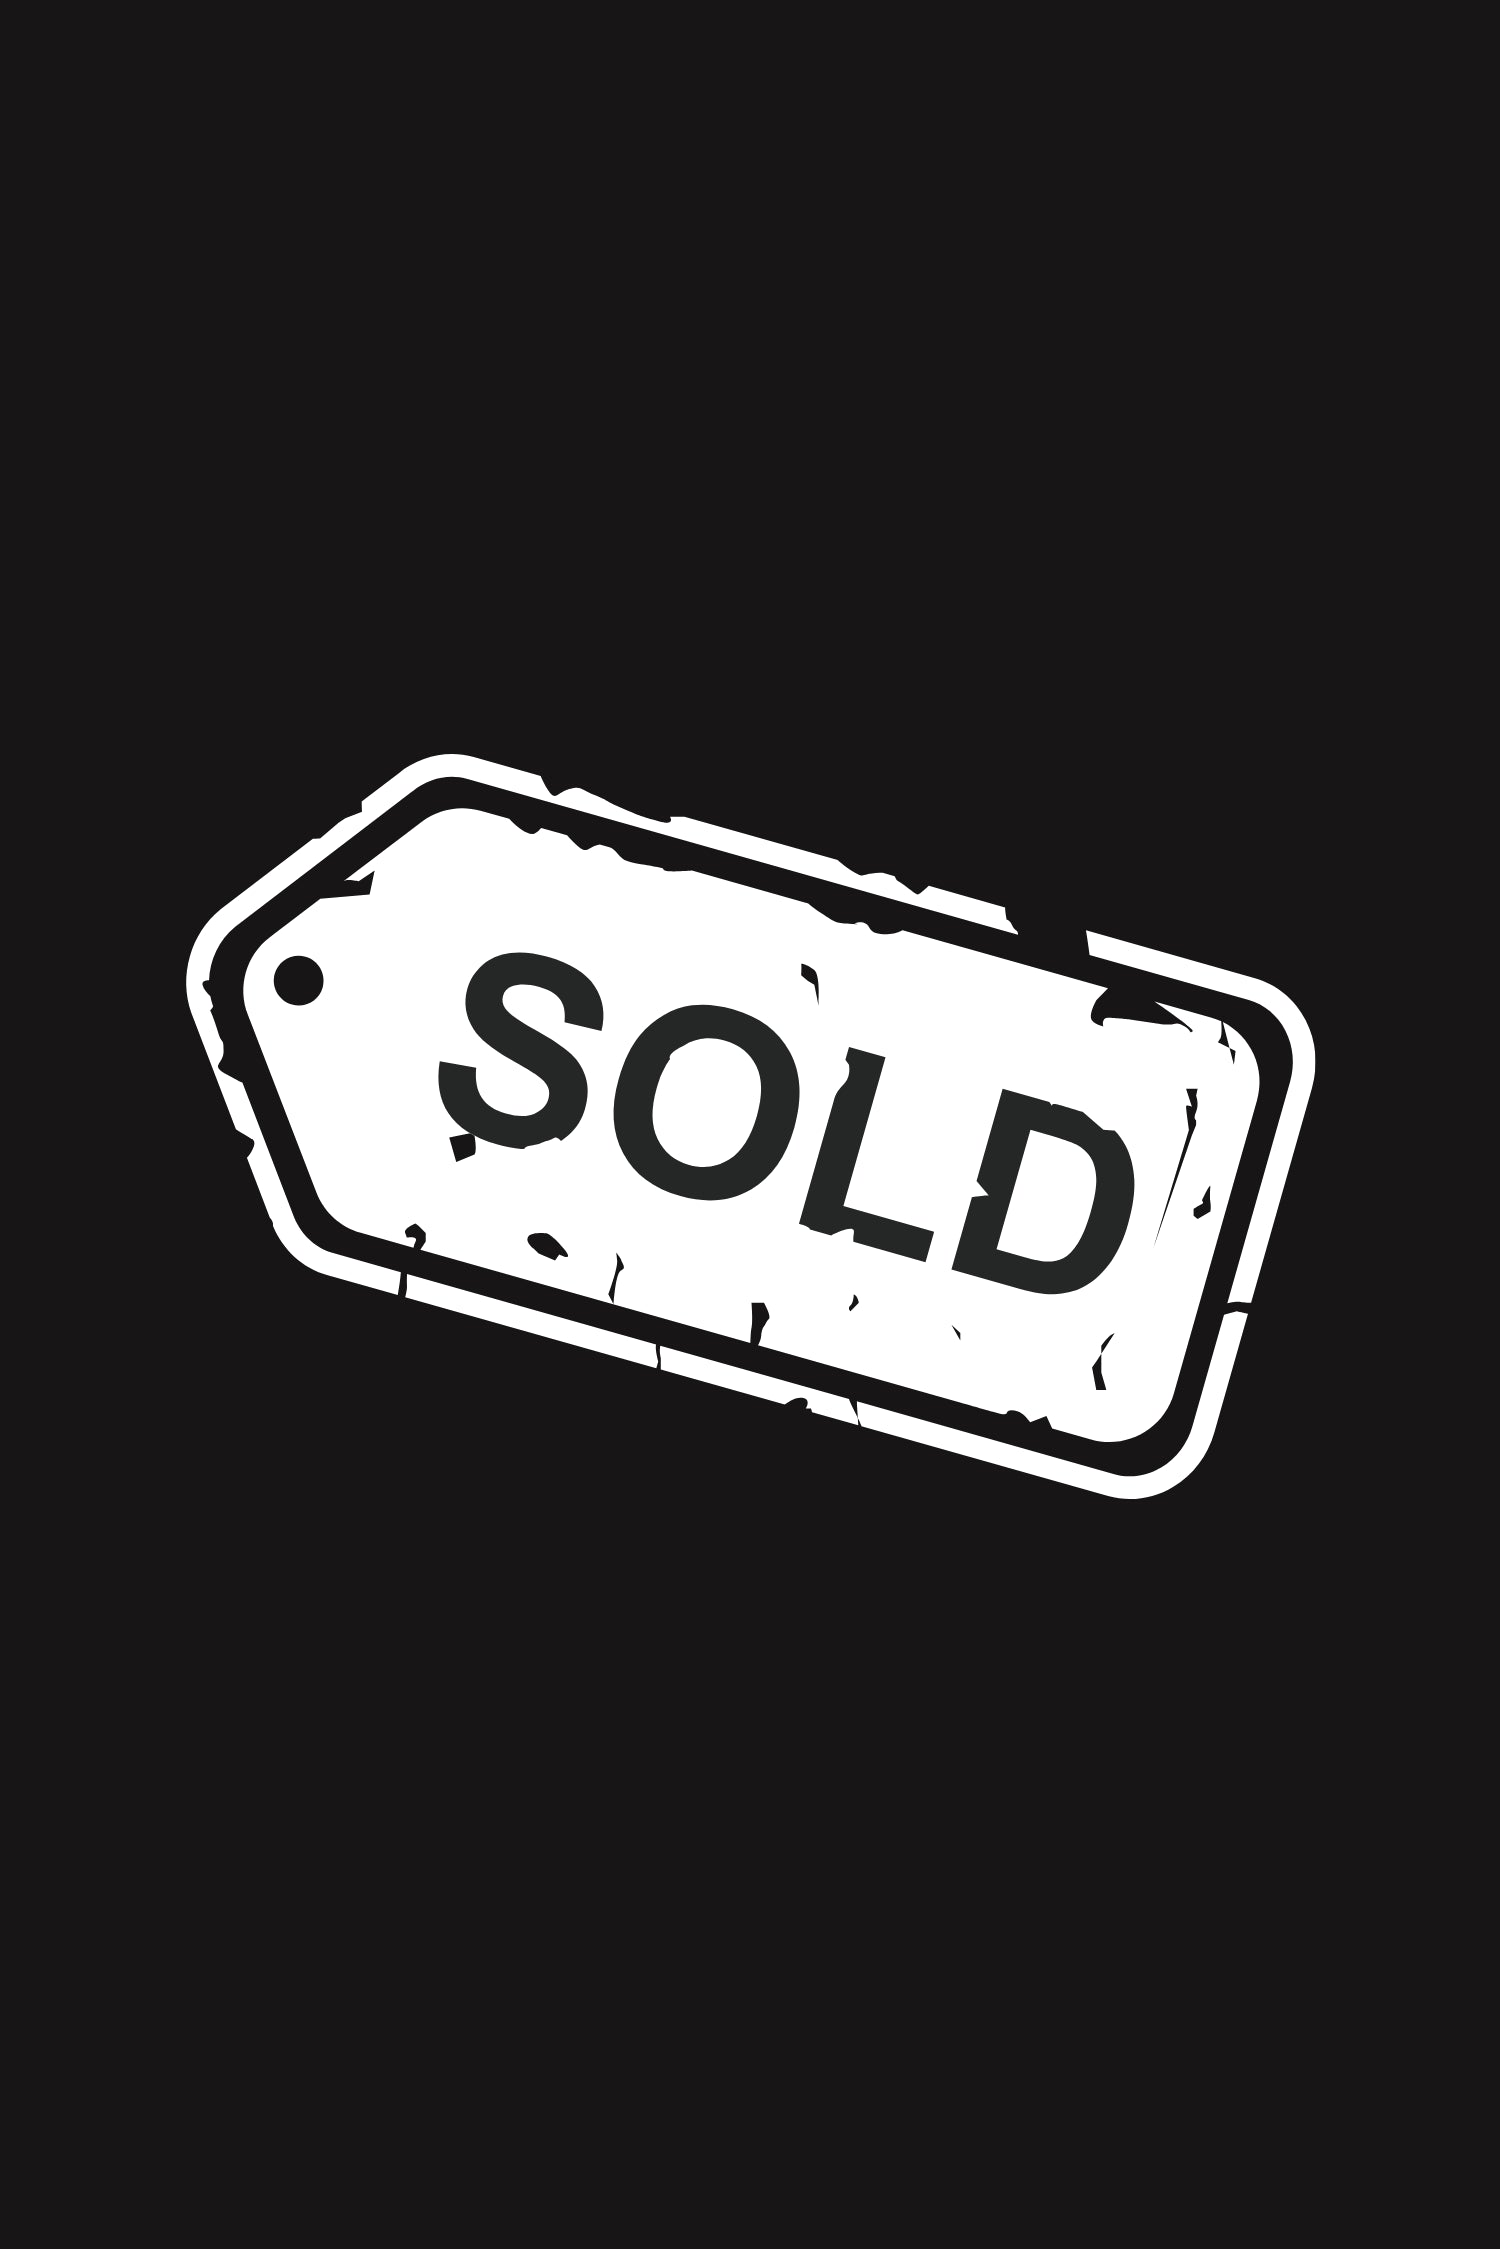 All Other Circular Hub Items Have Been Sold!